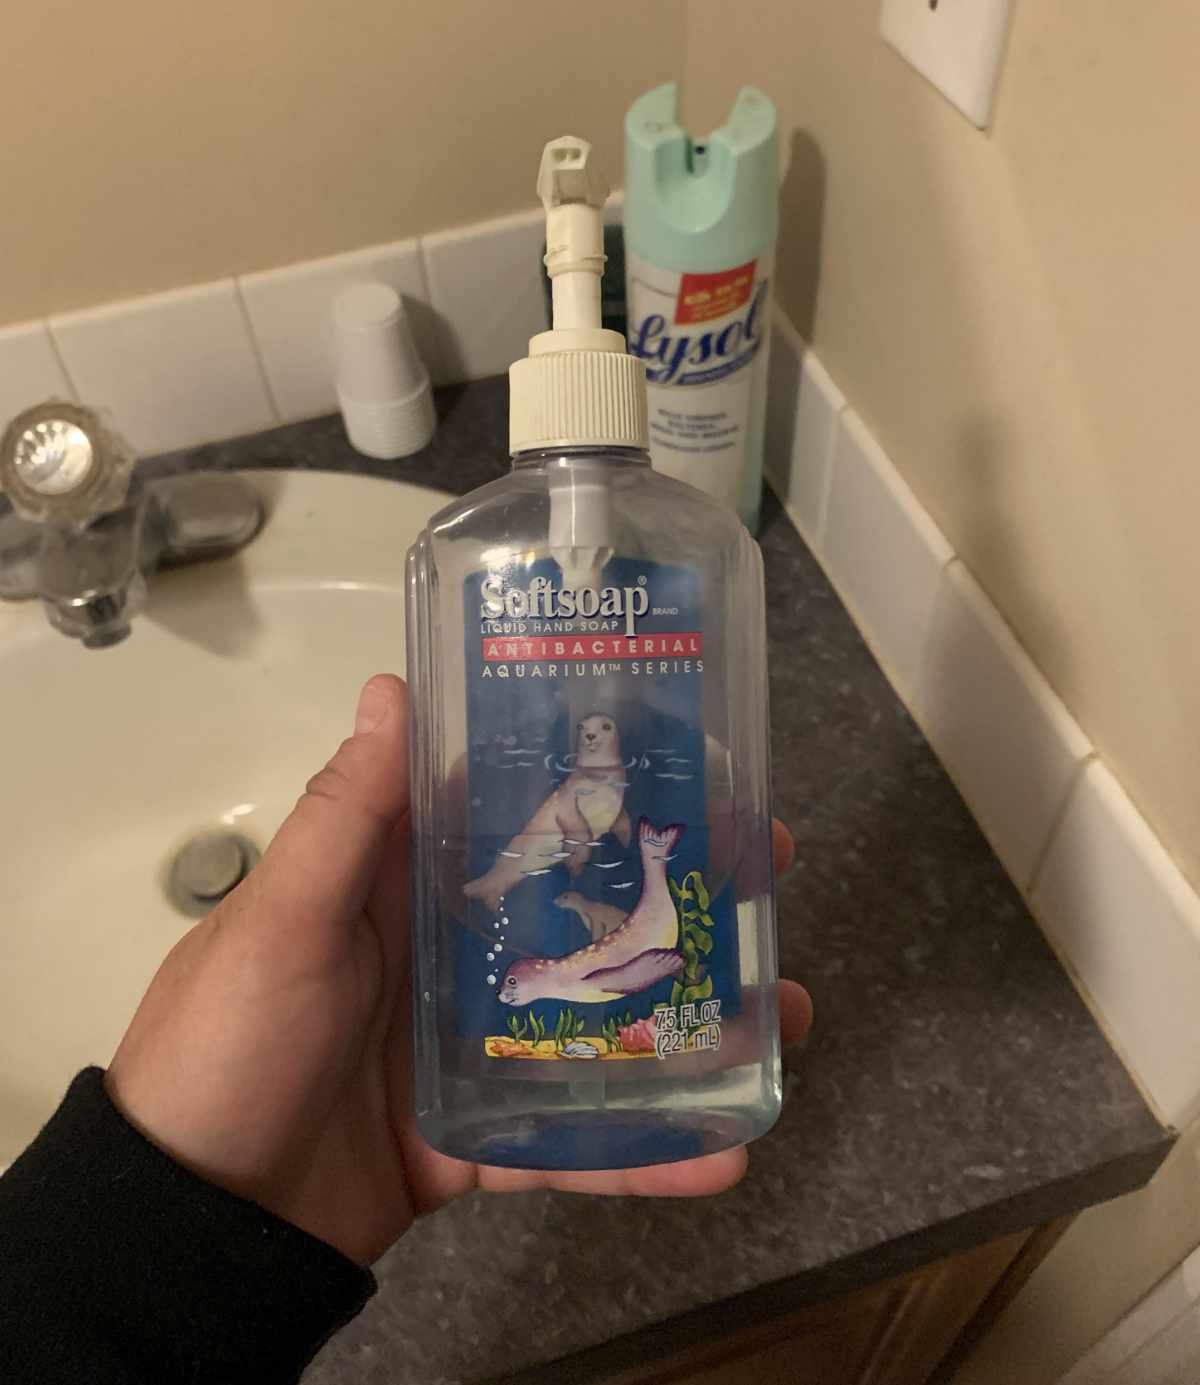 My grandparents have been refilling the same soap container since before I was born. I'm 24